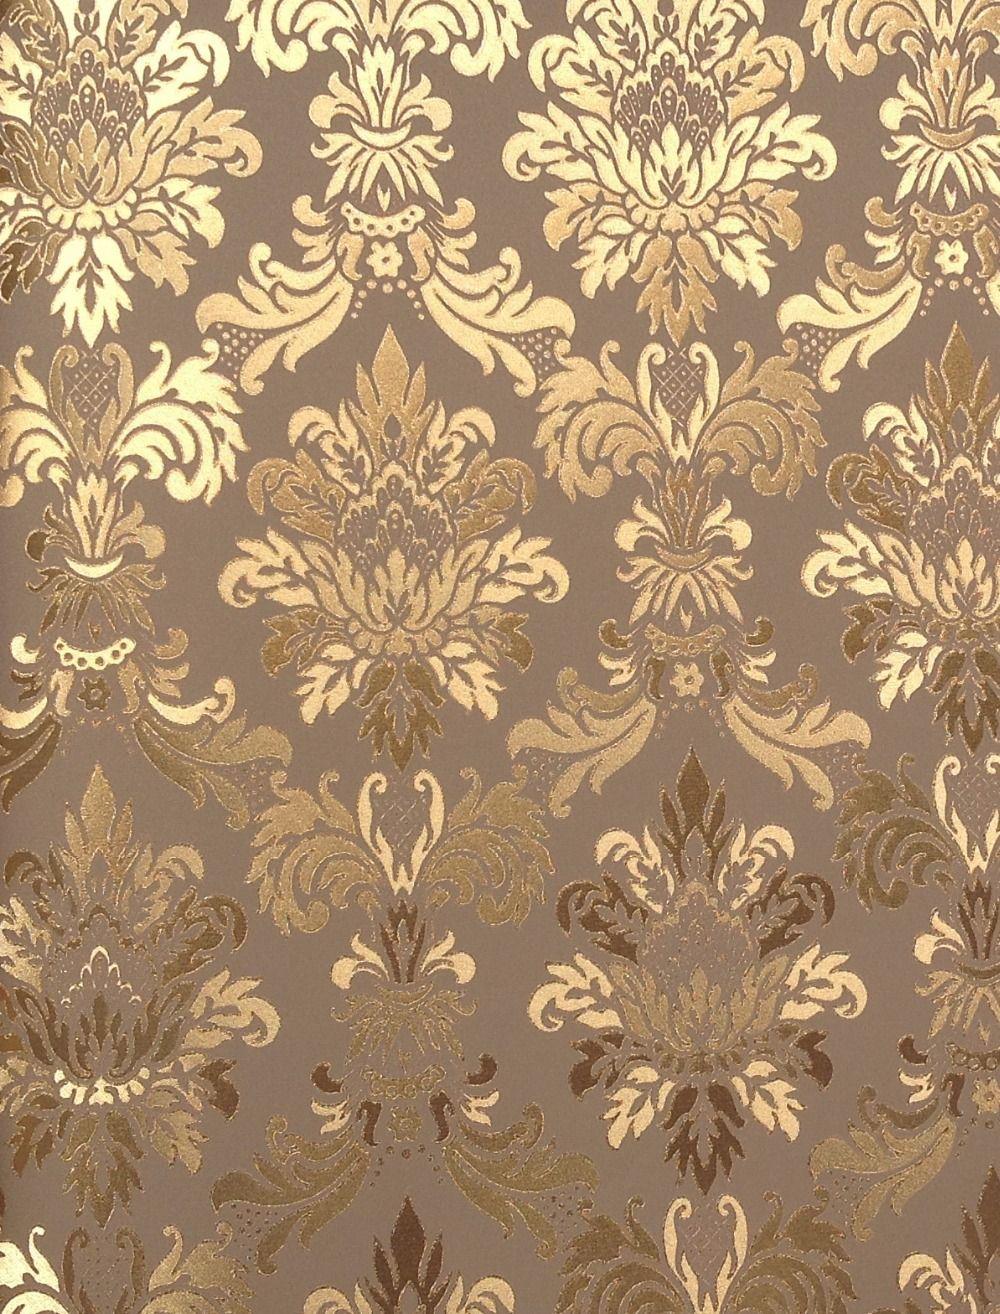 CY222 Gold foil wall paper, Chinese style vinyl wall paper, Luxury